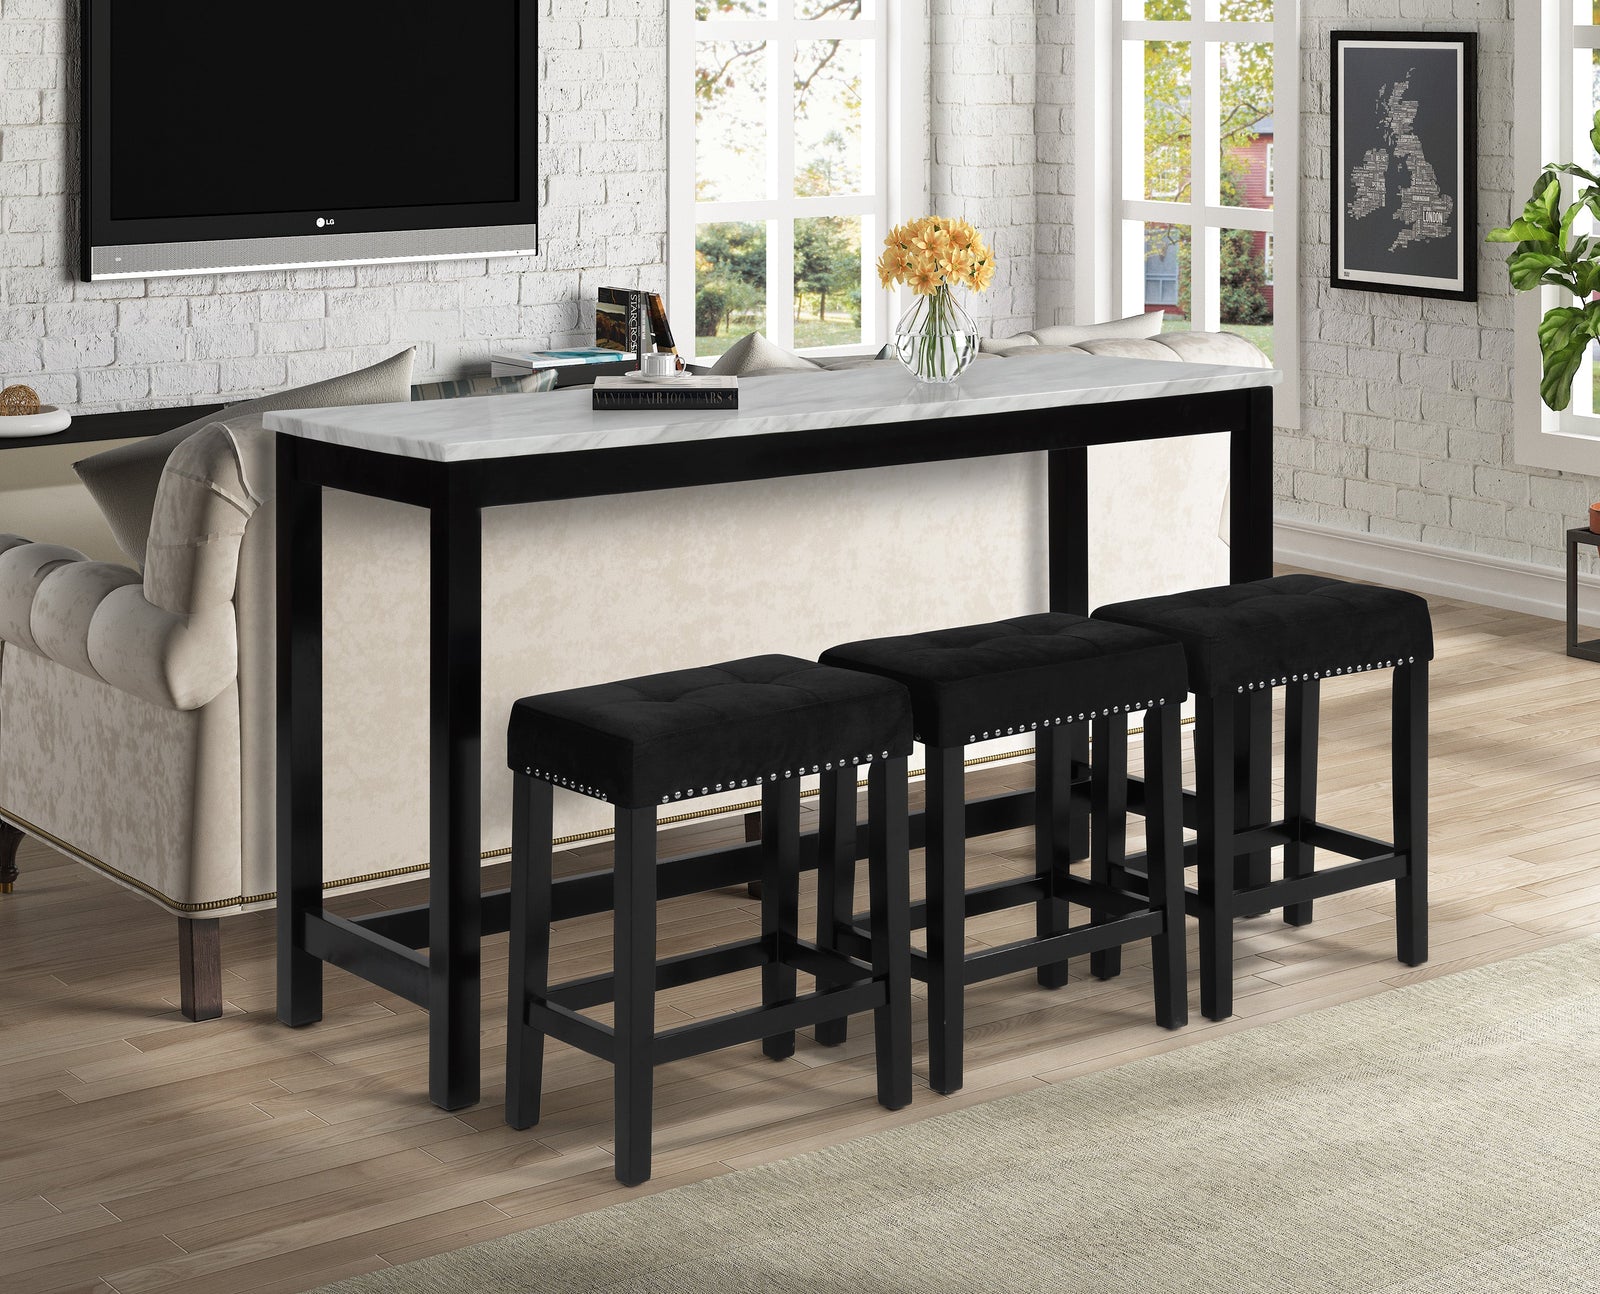 Lennon Black Crystal Console Table, Sleek Wooden Construction And Understated Black Finish